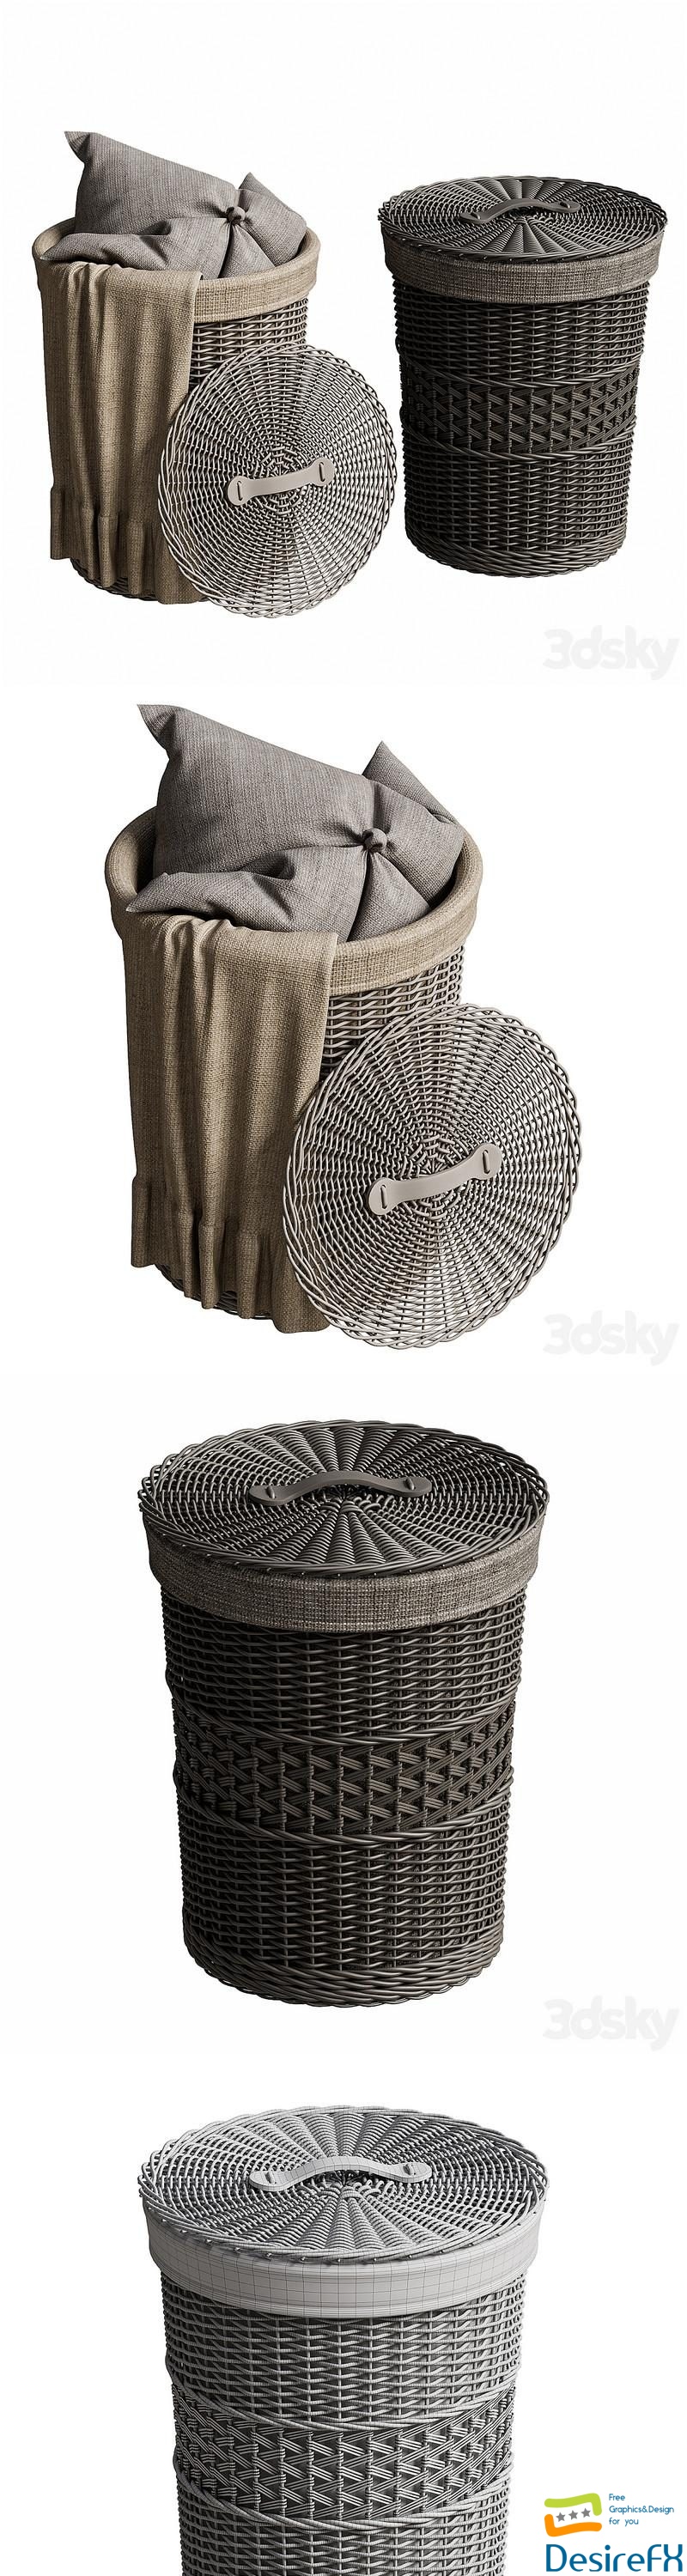 Wicker basket with pillow and blanket 3D Model